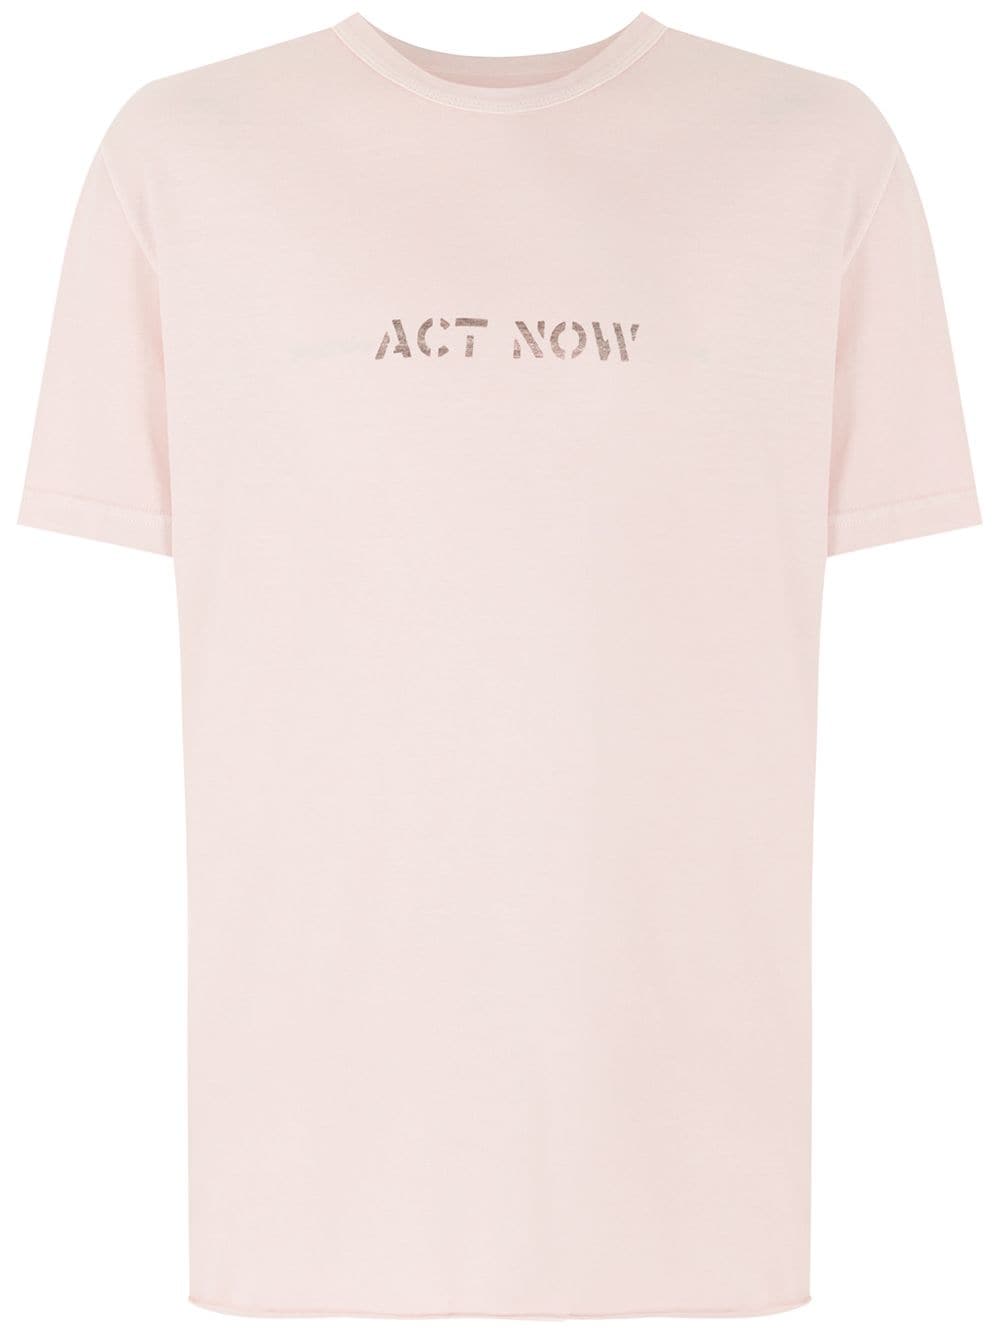 Osklen Strong Double Act Now T-shirt In Pink